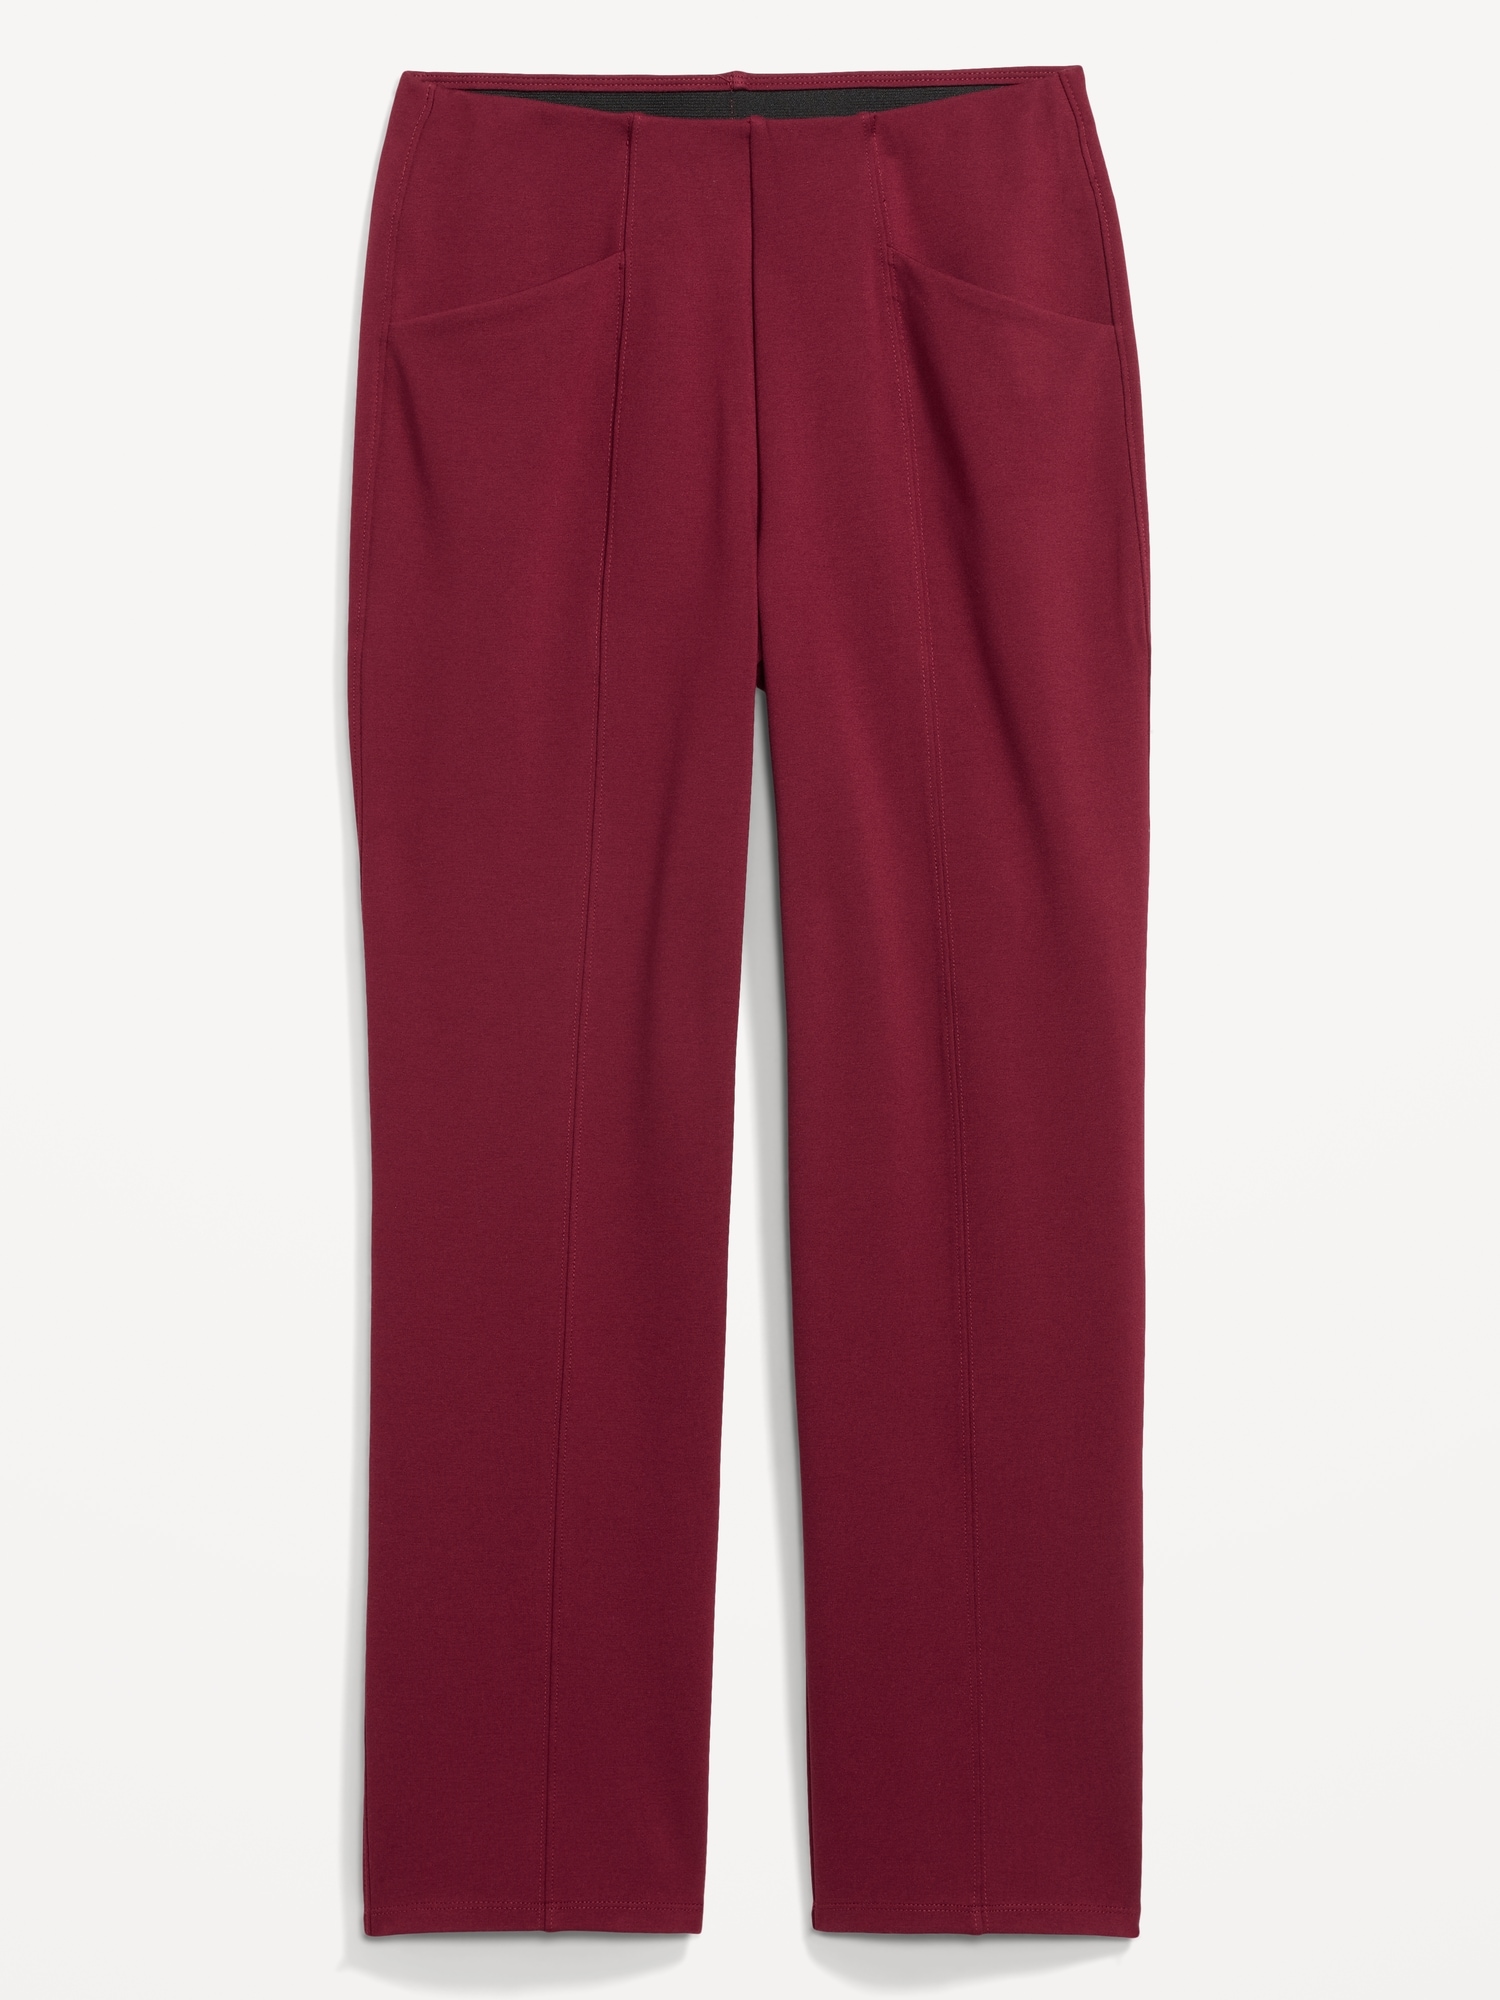 Extra High-Waisted Stevie Straight Ankle Pants, Old Navy